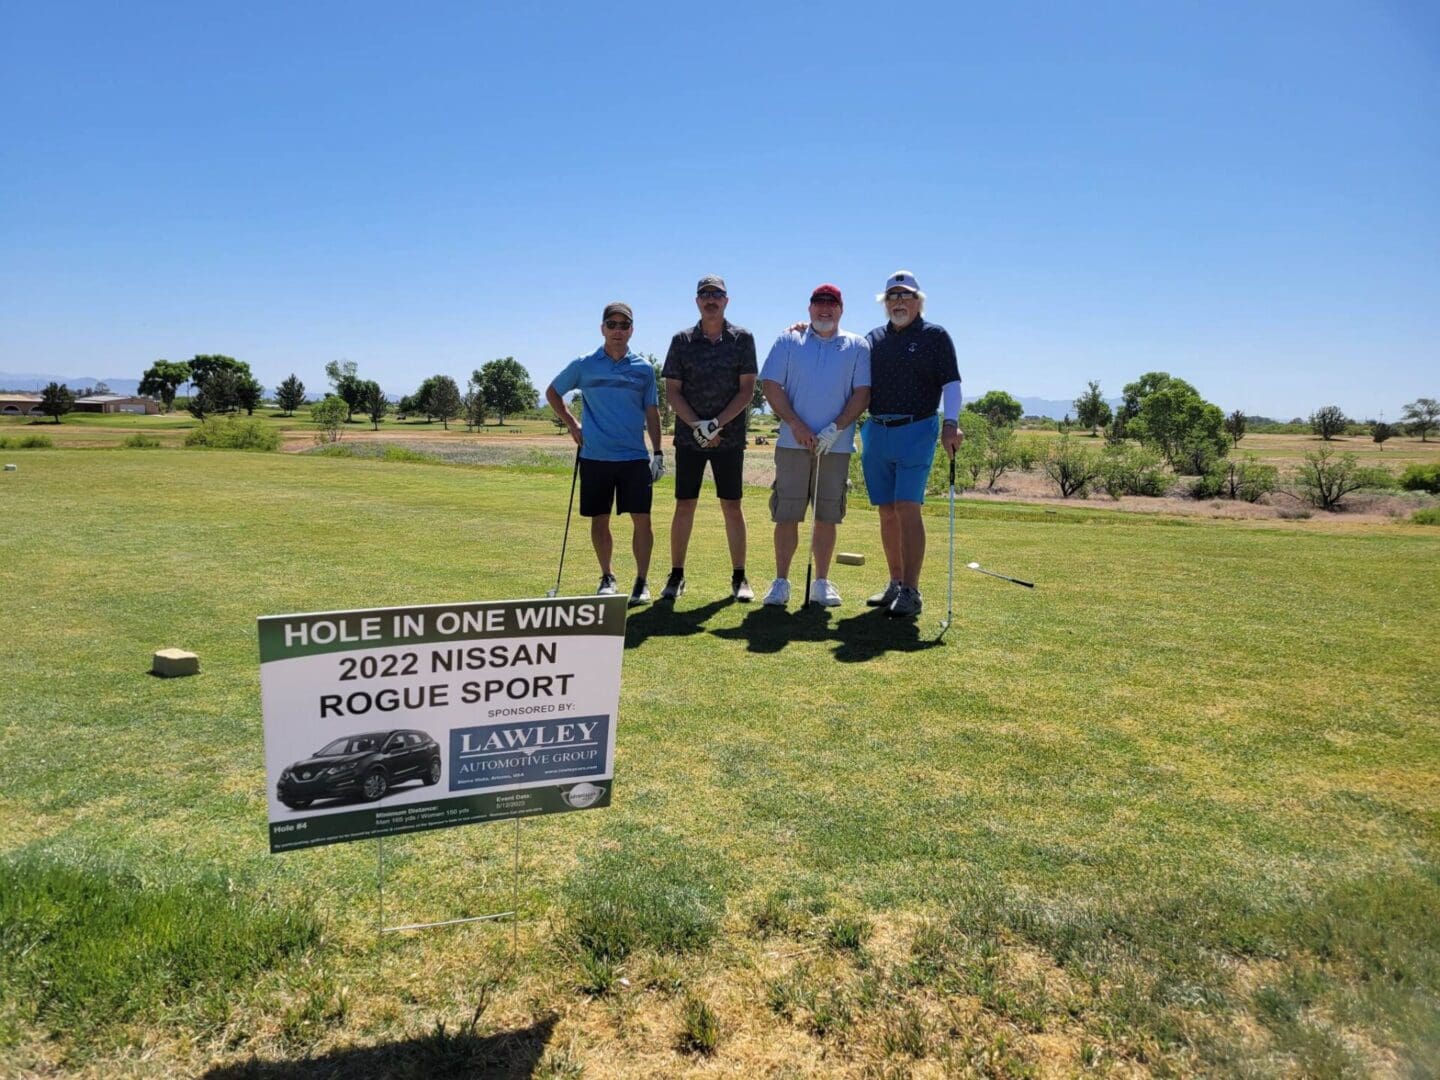 Four men standing on a golf course with a sign.